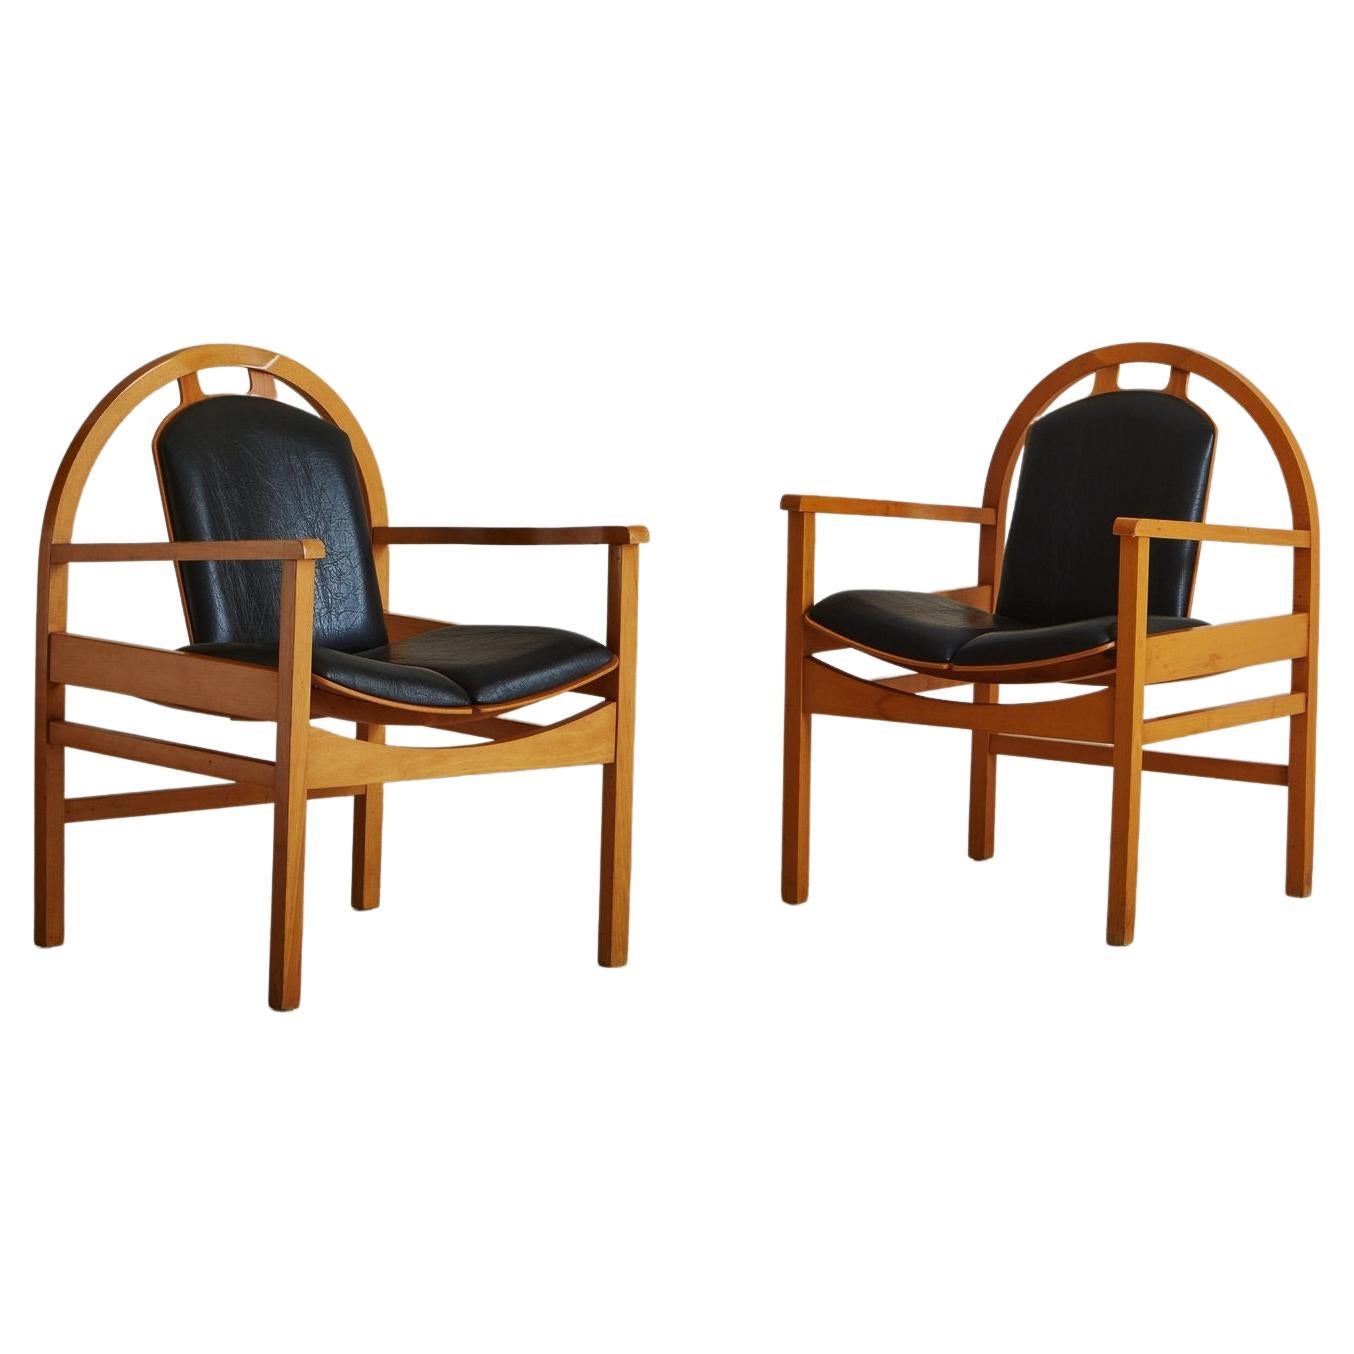 Pair of Leather + Beechwood Argos Lounge Chairs by Baumann, France, 1970s For Sale